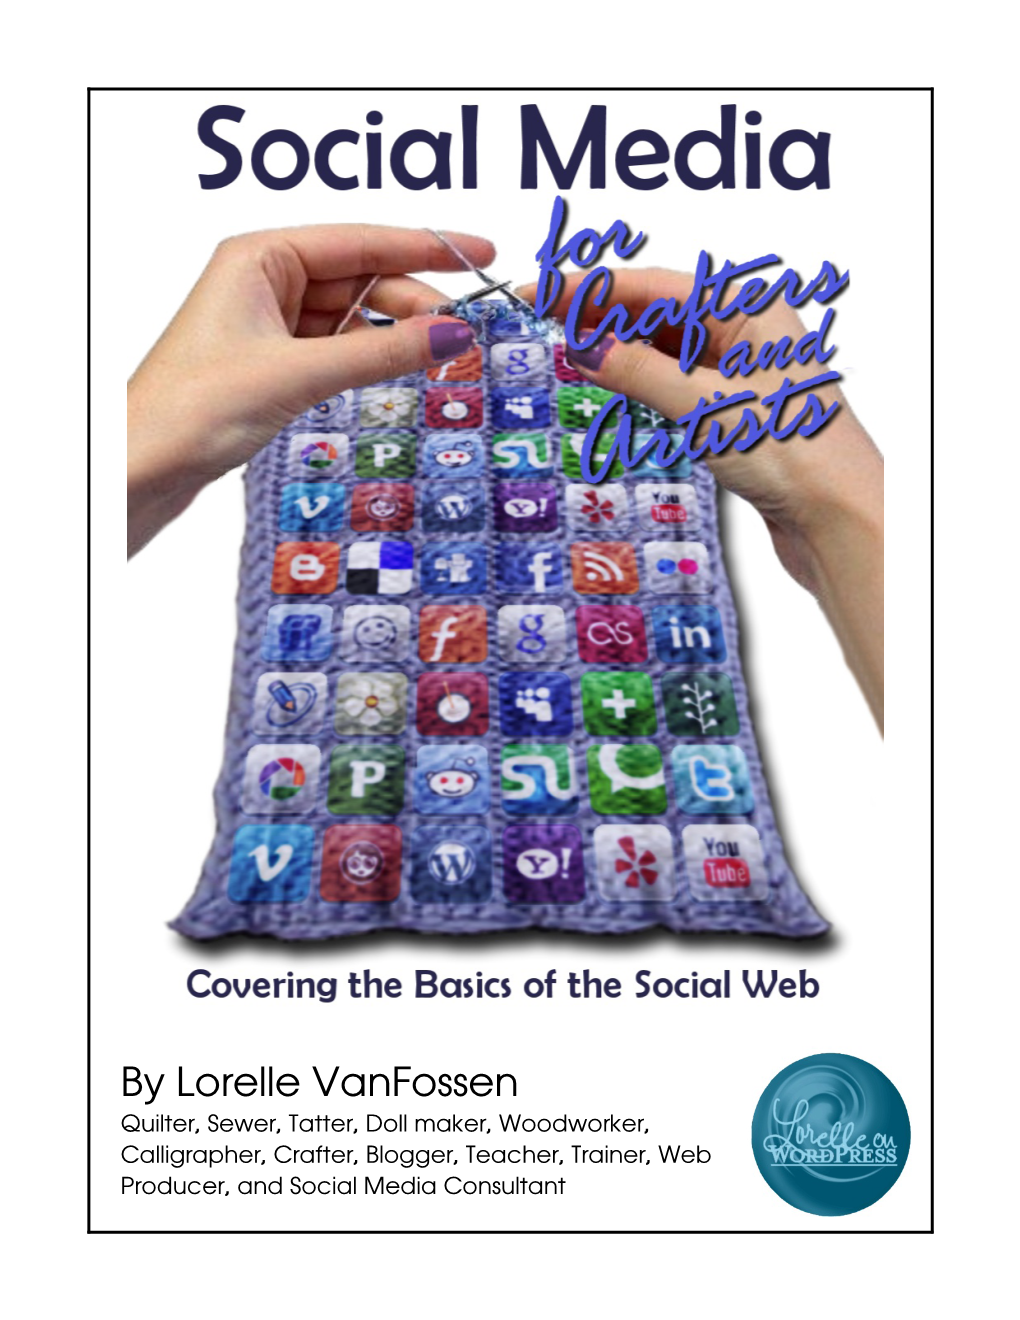 Social Media for Crafters and Artists Book by Lorelle Vanfossen